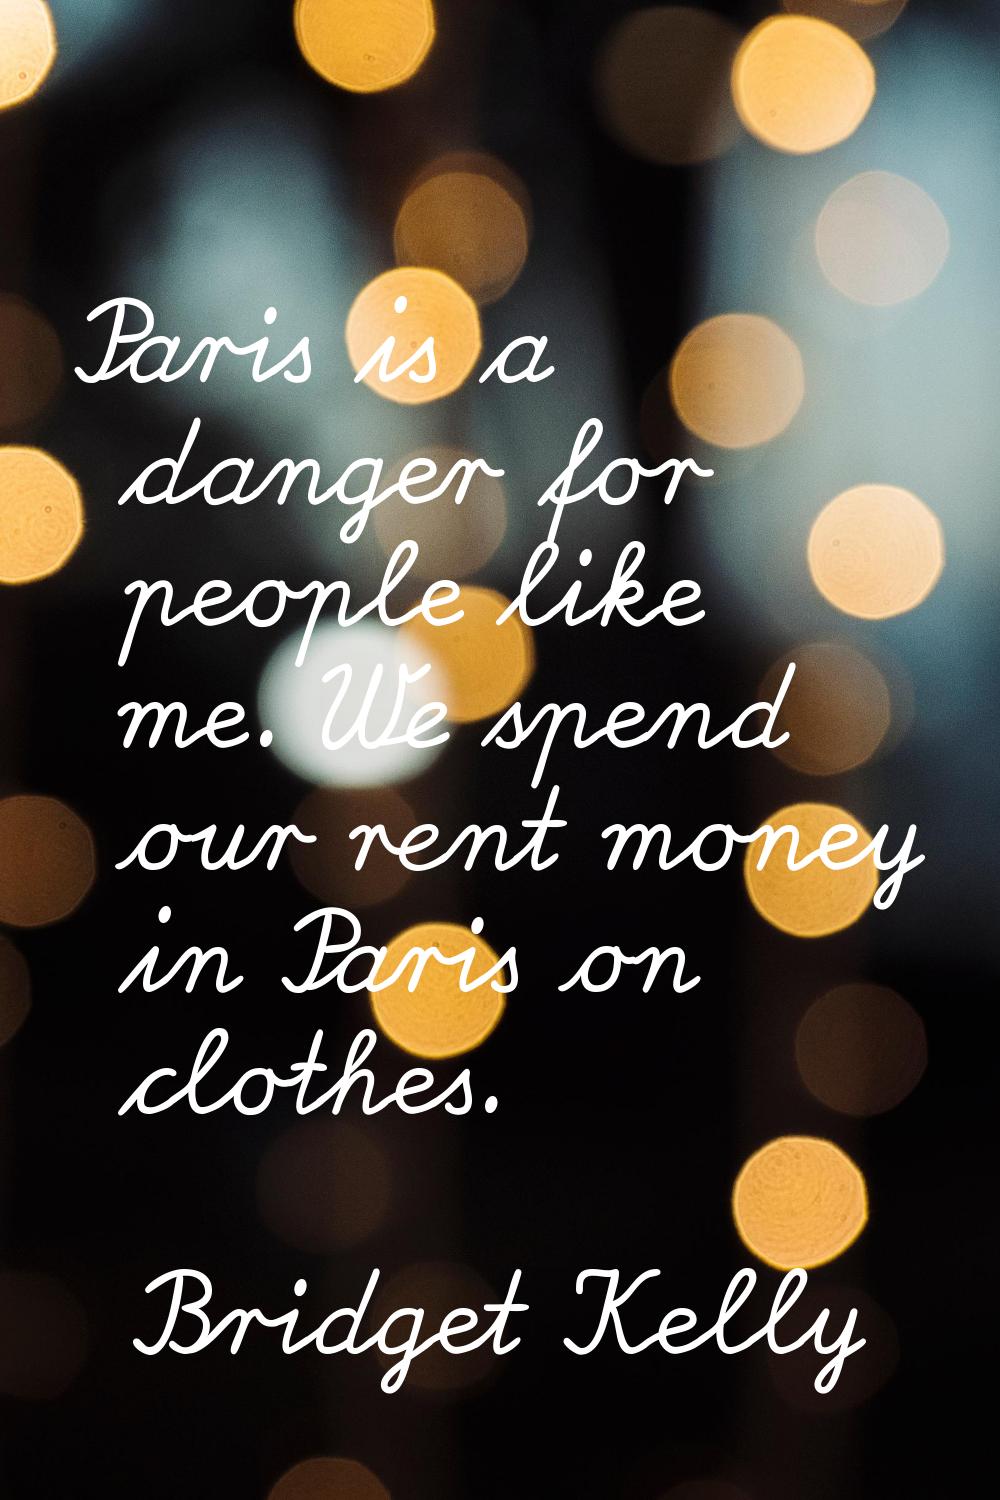 Paris is a danger for people like me. We spend our rent money in Paris on clothes.